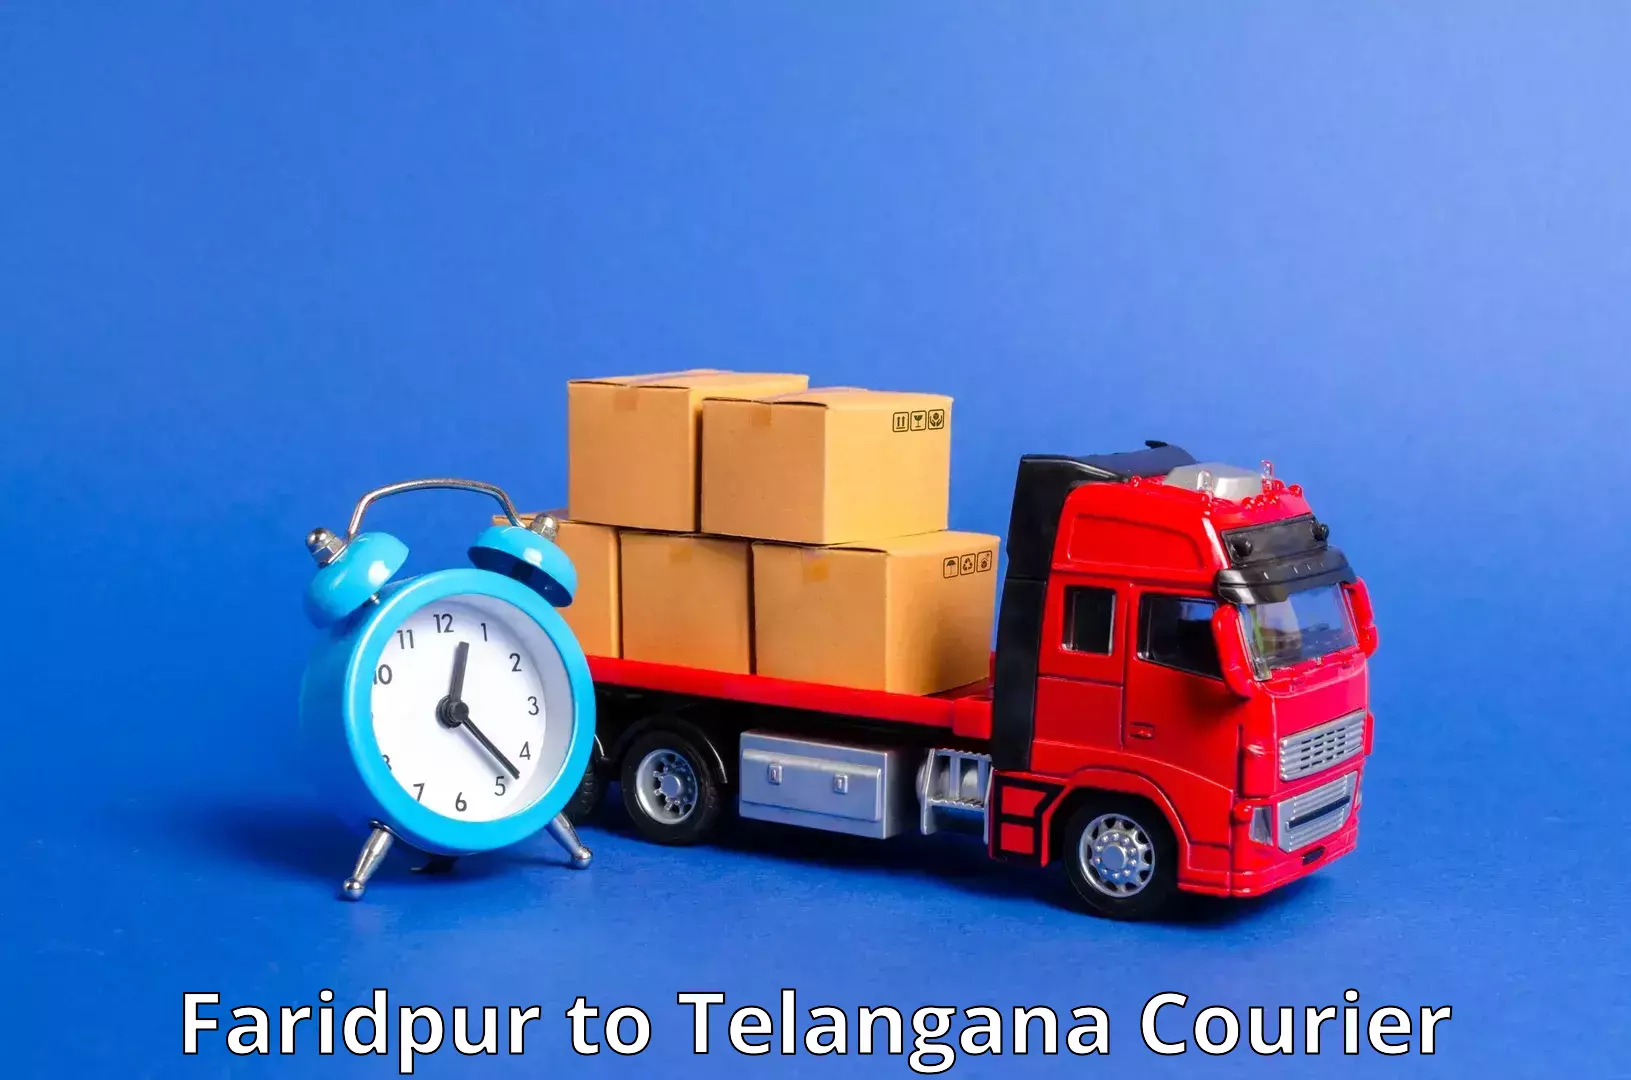 Expedited parcel delivery in Faridpur to Mahabubabad